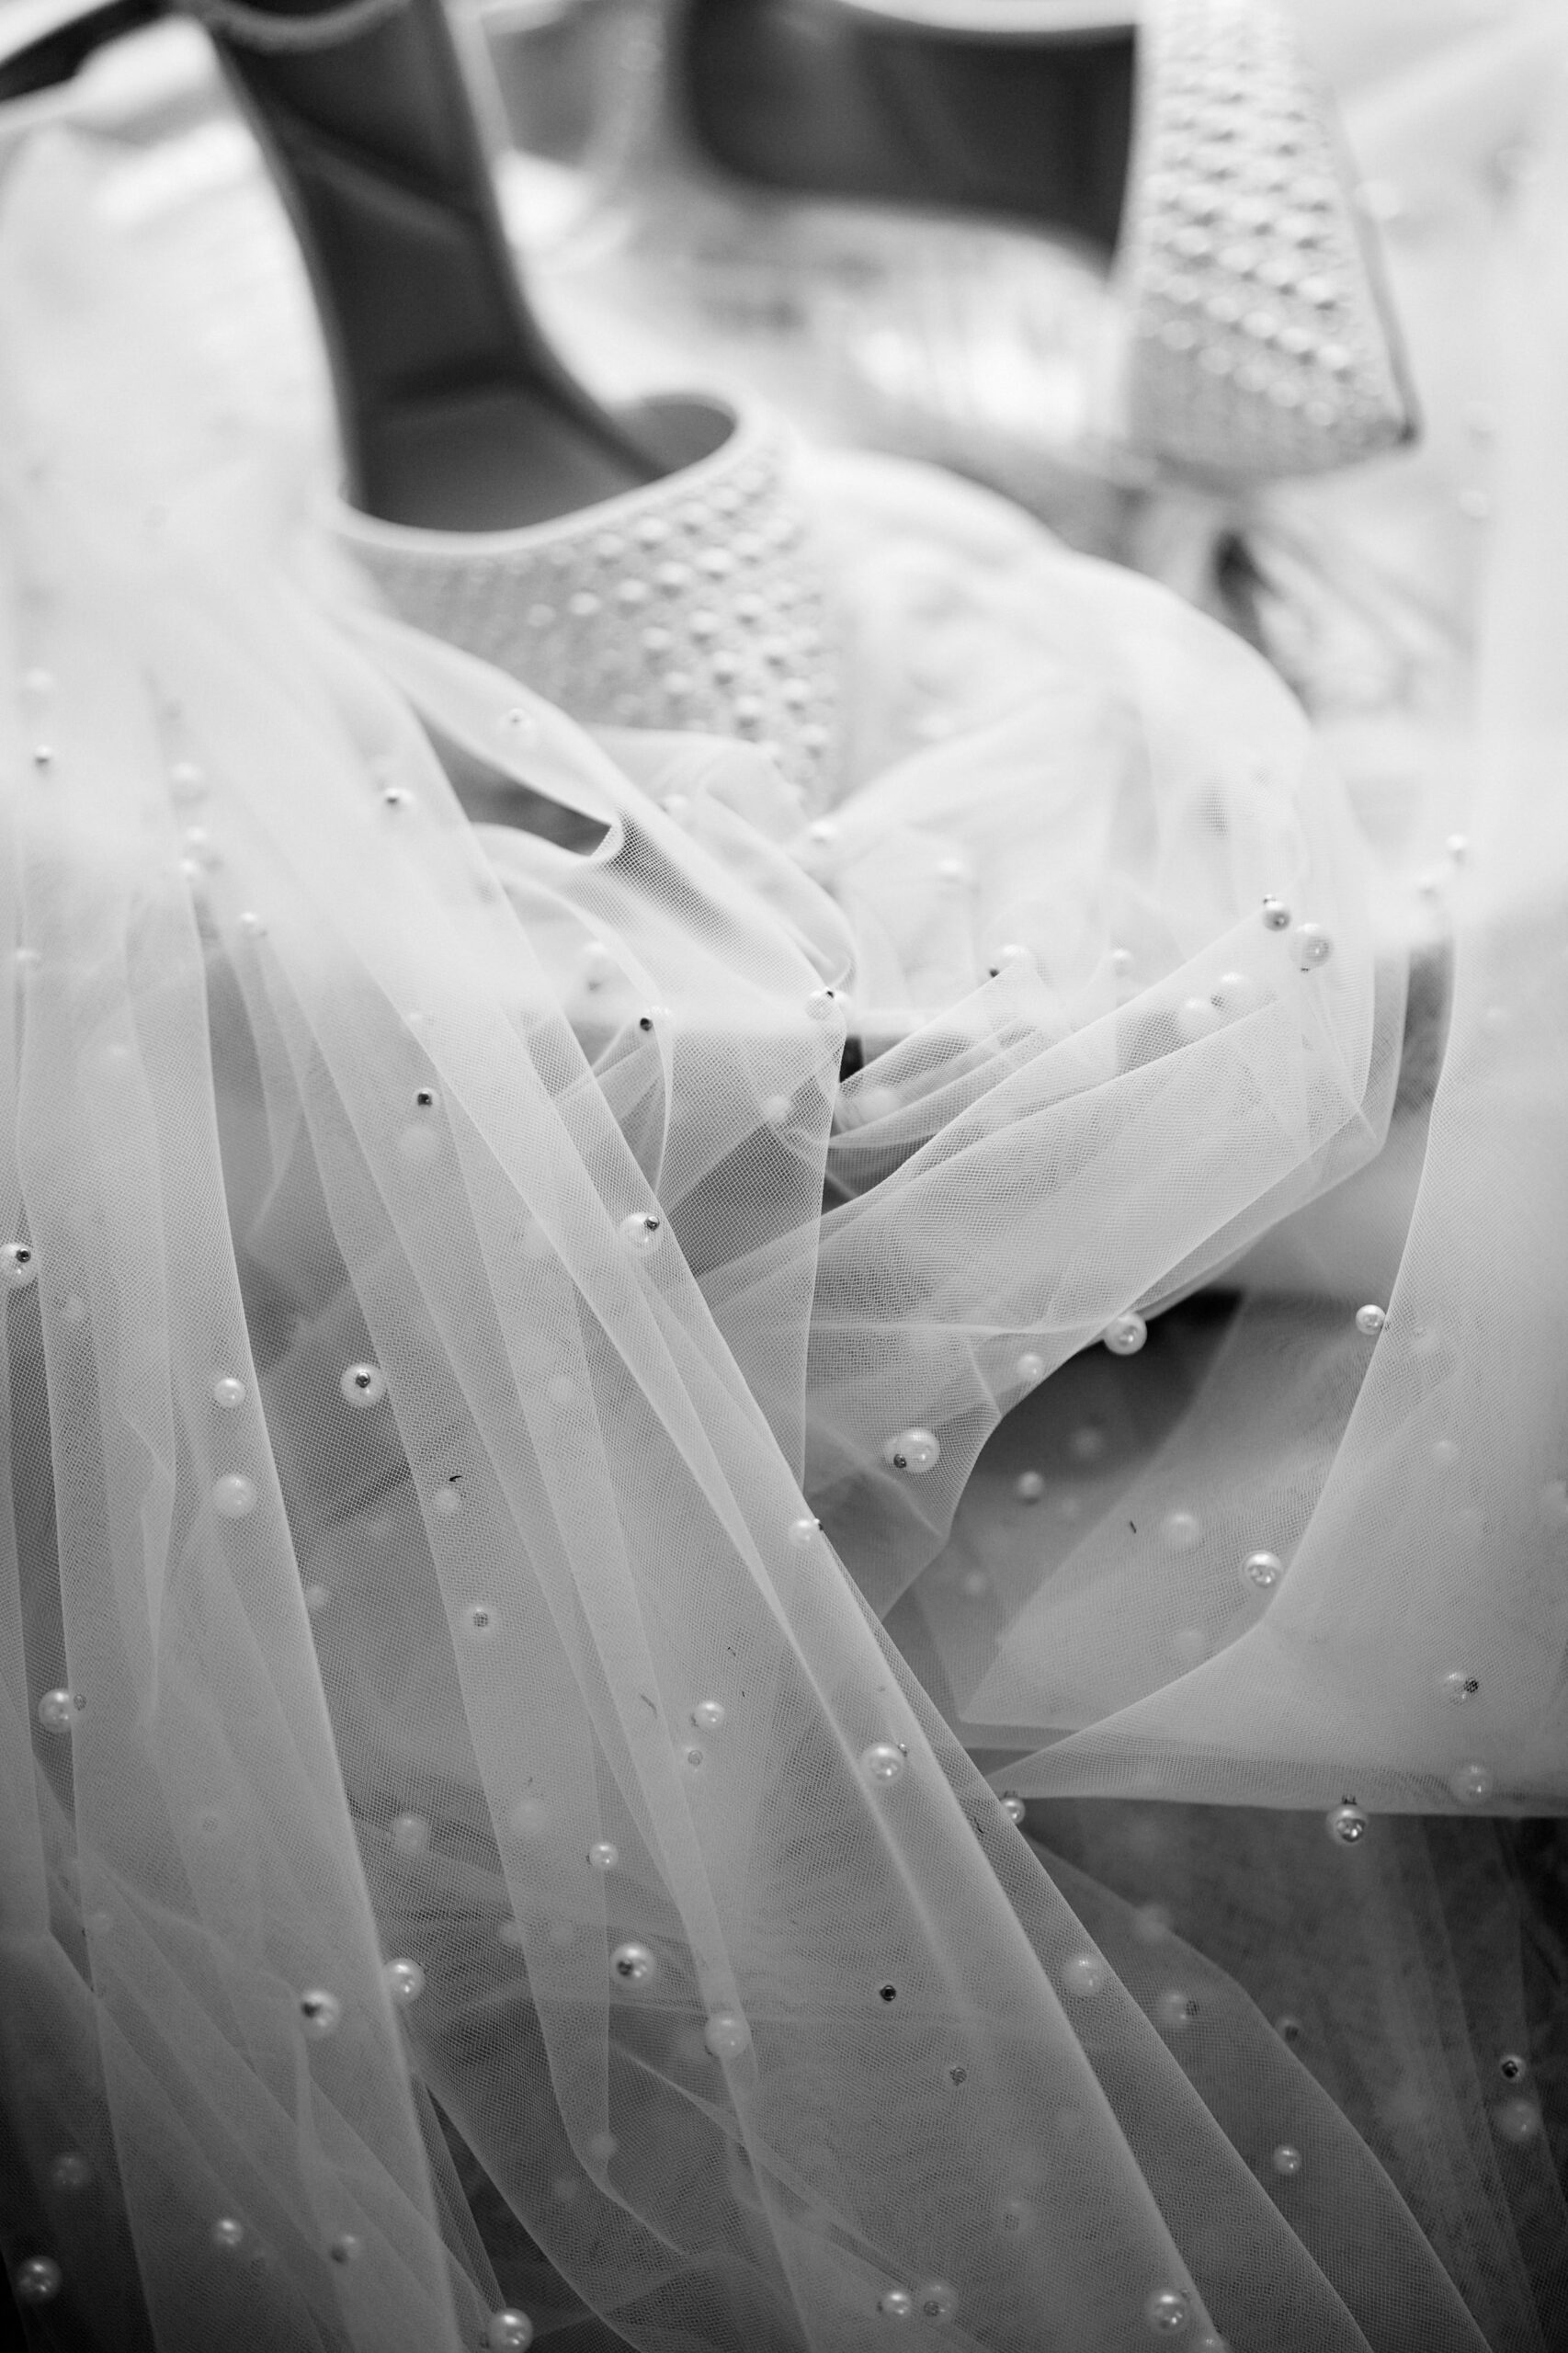 A picture of a wedding dress and shoes in black and white.